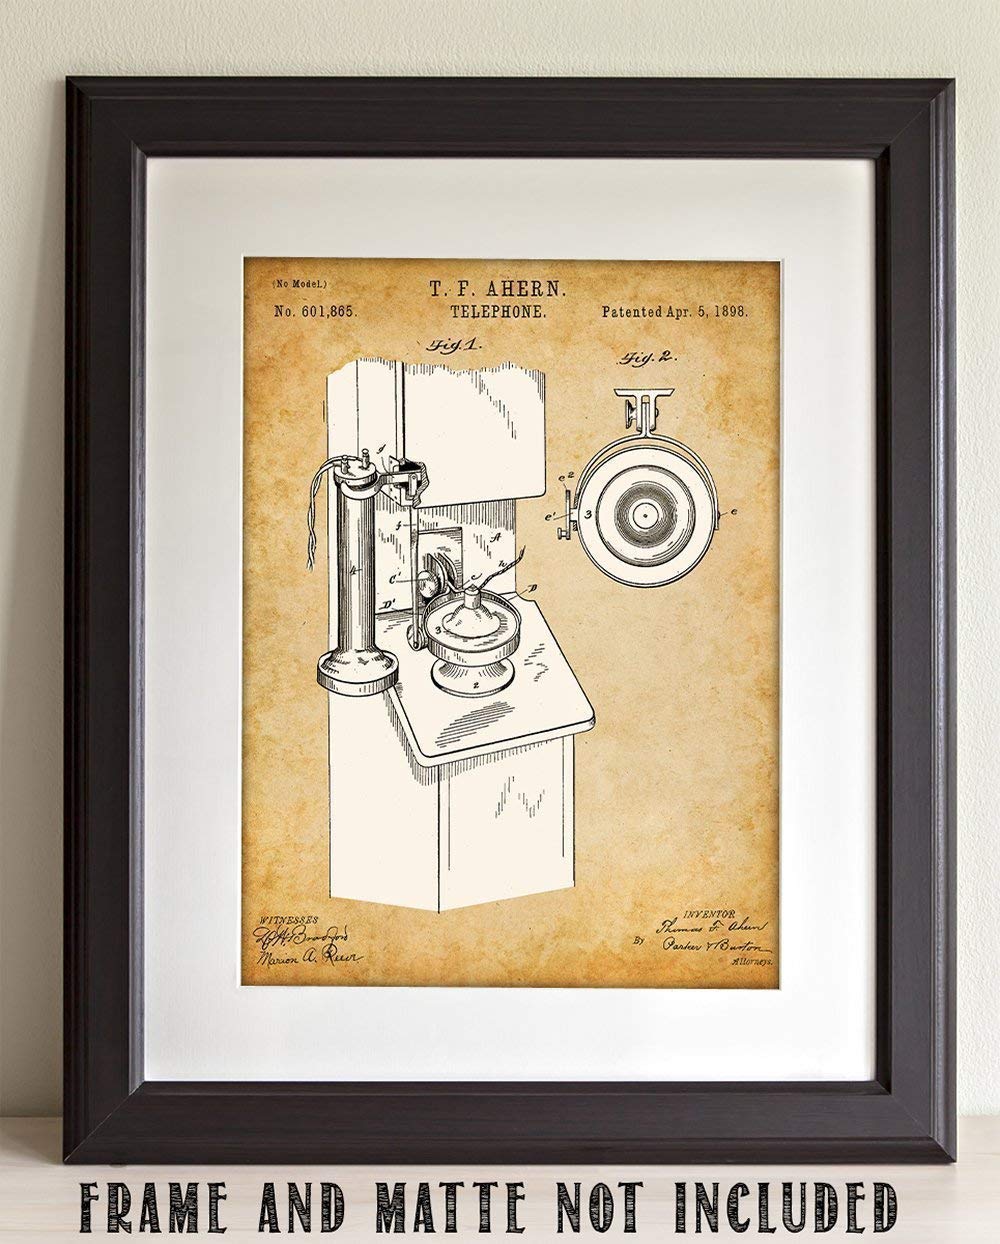 Telephone - 11x14 Unframed Patent Print - Makes a Great Home or Office Decor and Gift Under $15 for Inventors